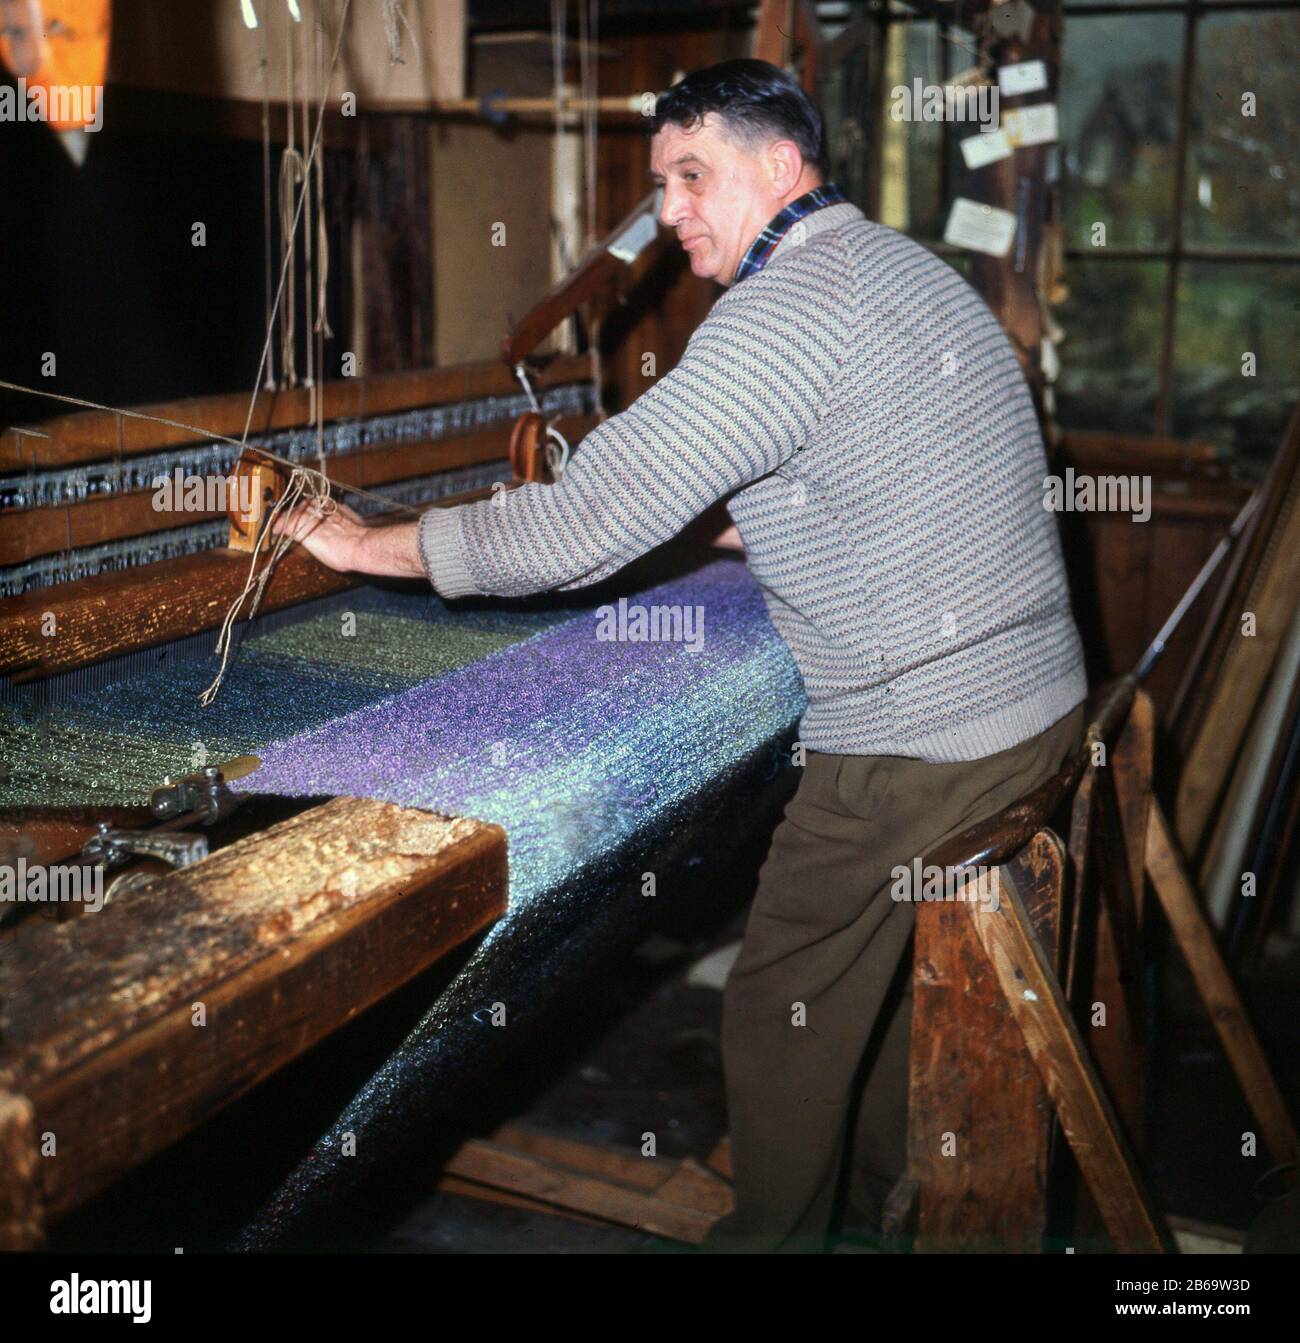 1960s, a man weaving mohair cloth by hand on a wooden loom, Grasmere, Cumbria. A silk-life fabric or yarn, mohair is made from the long hair of the Angora goat and as can be seen takes dyes well, to produce vibrant colourful garments. Stock Photo